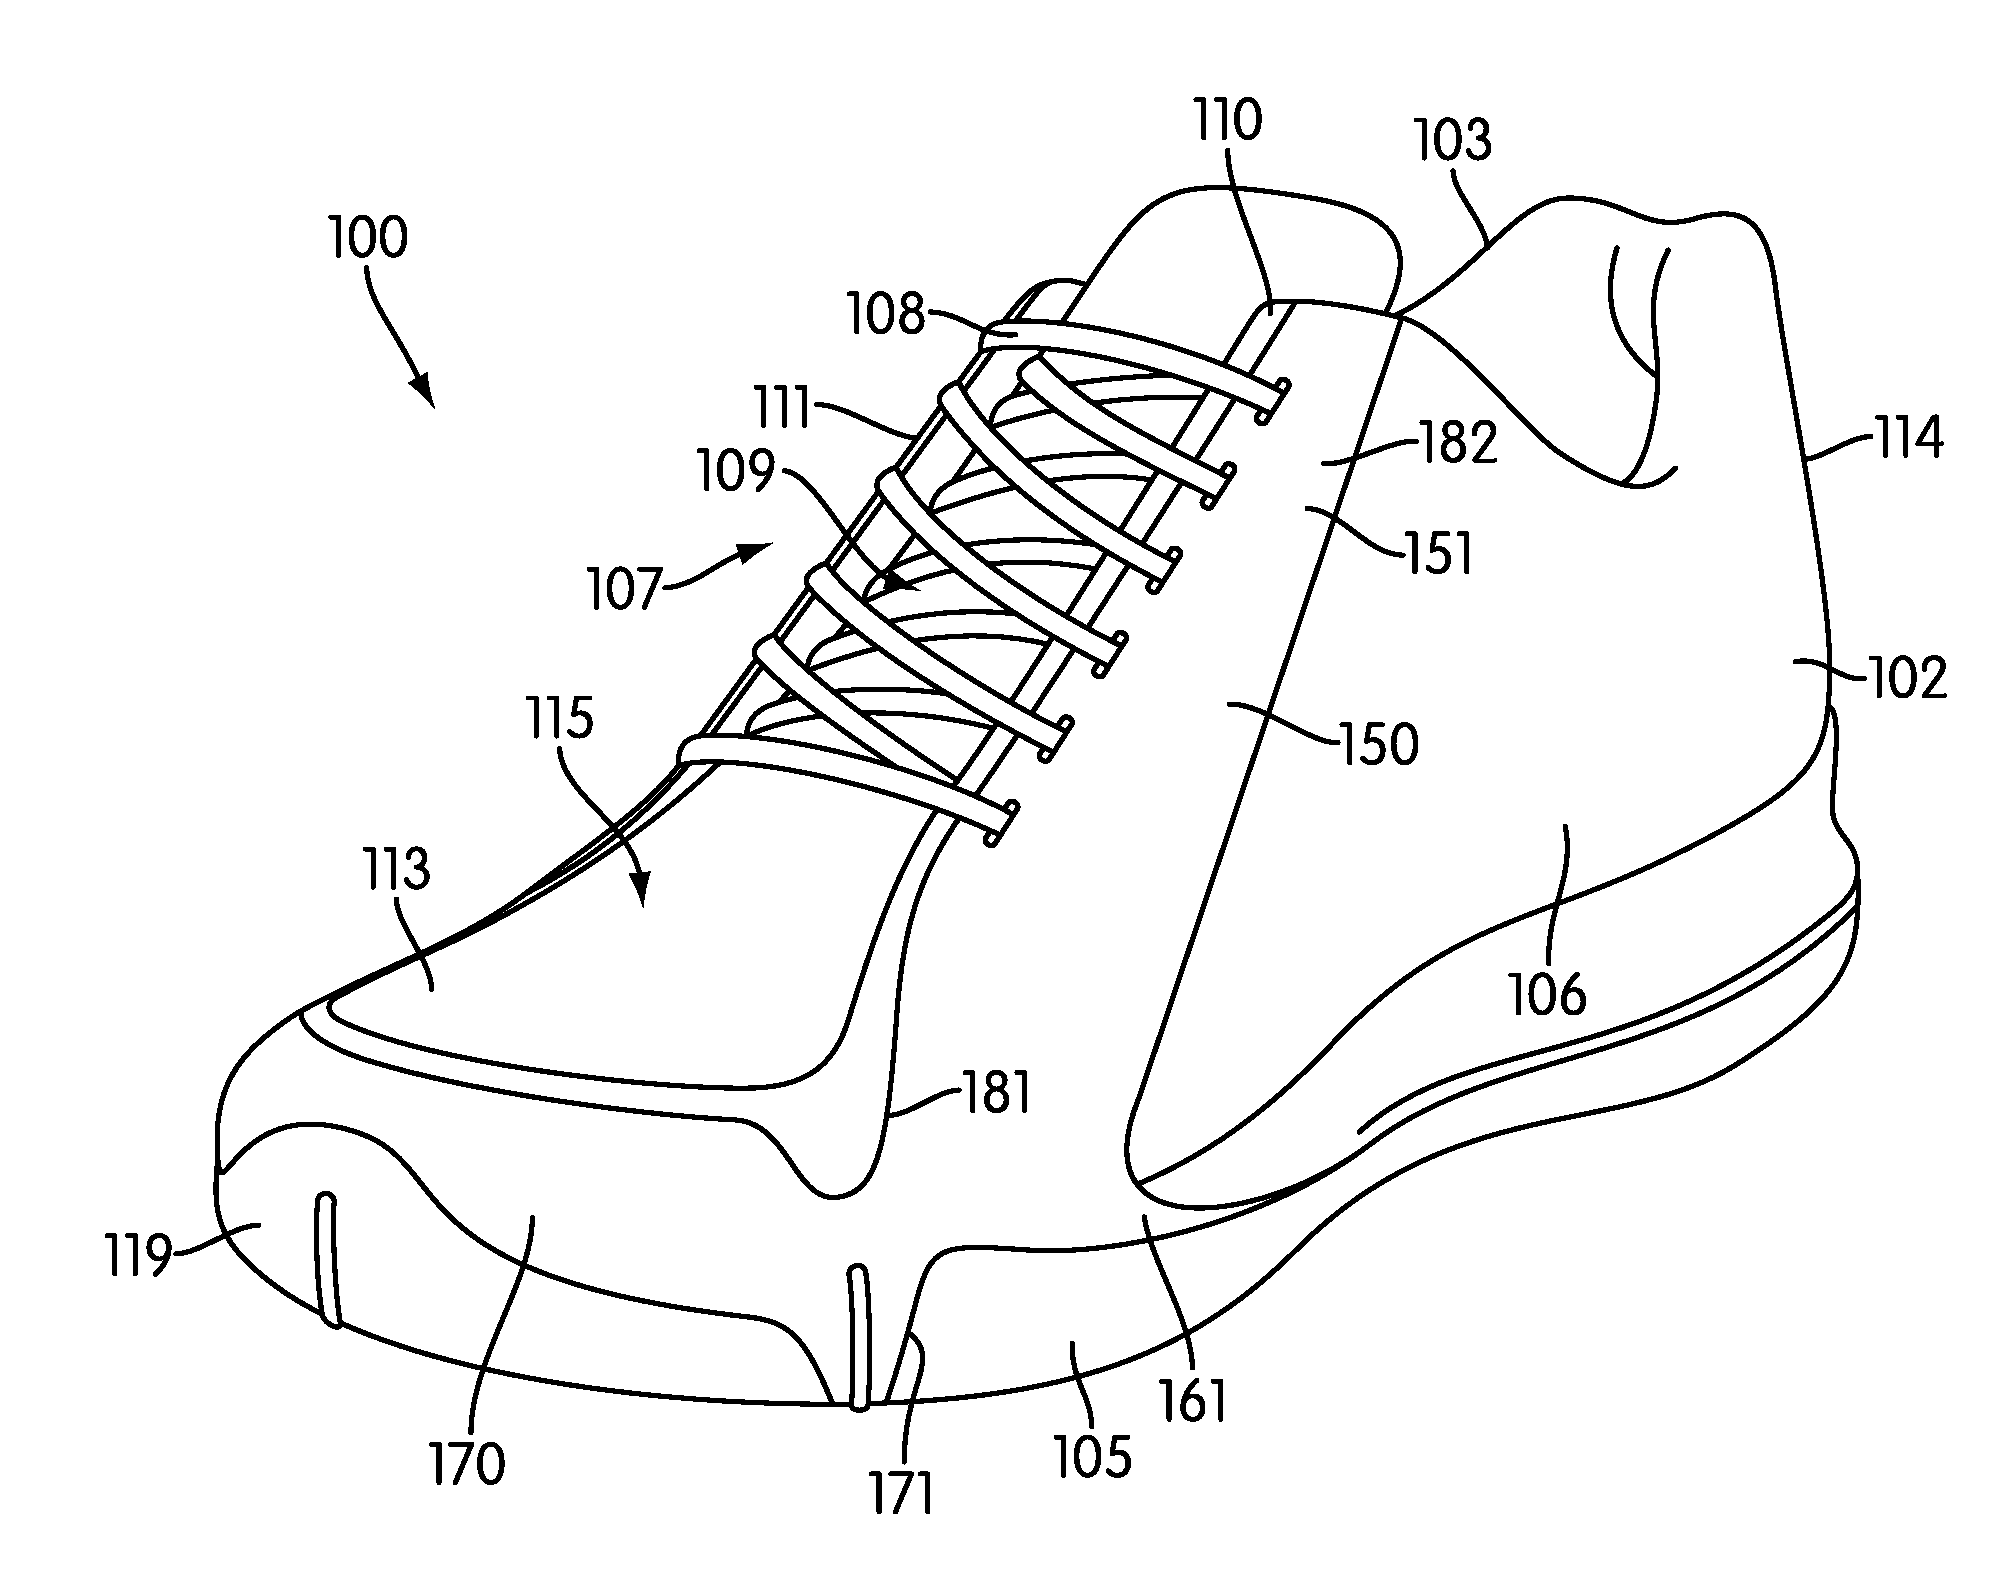 Article of Footwear with Arch Wrap